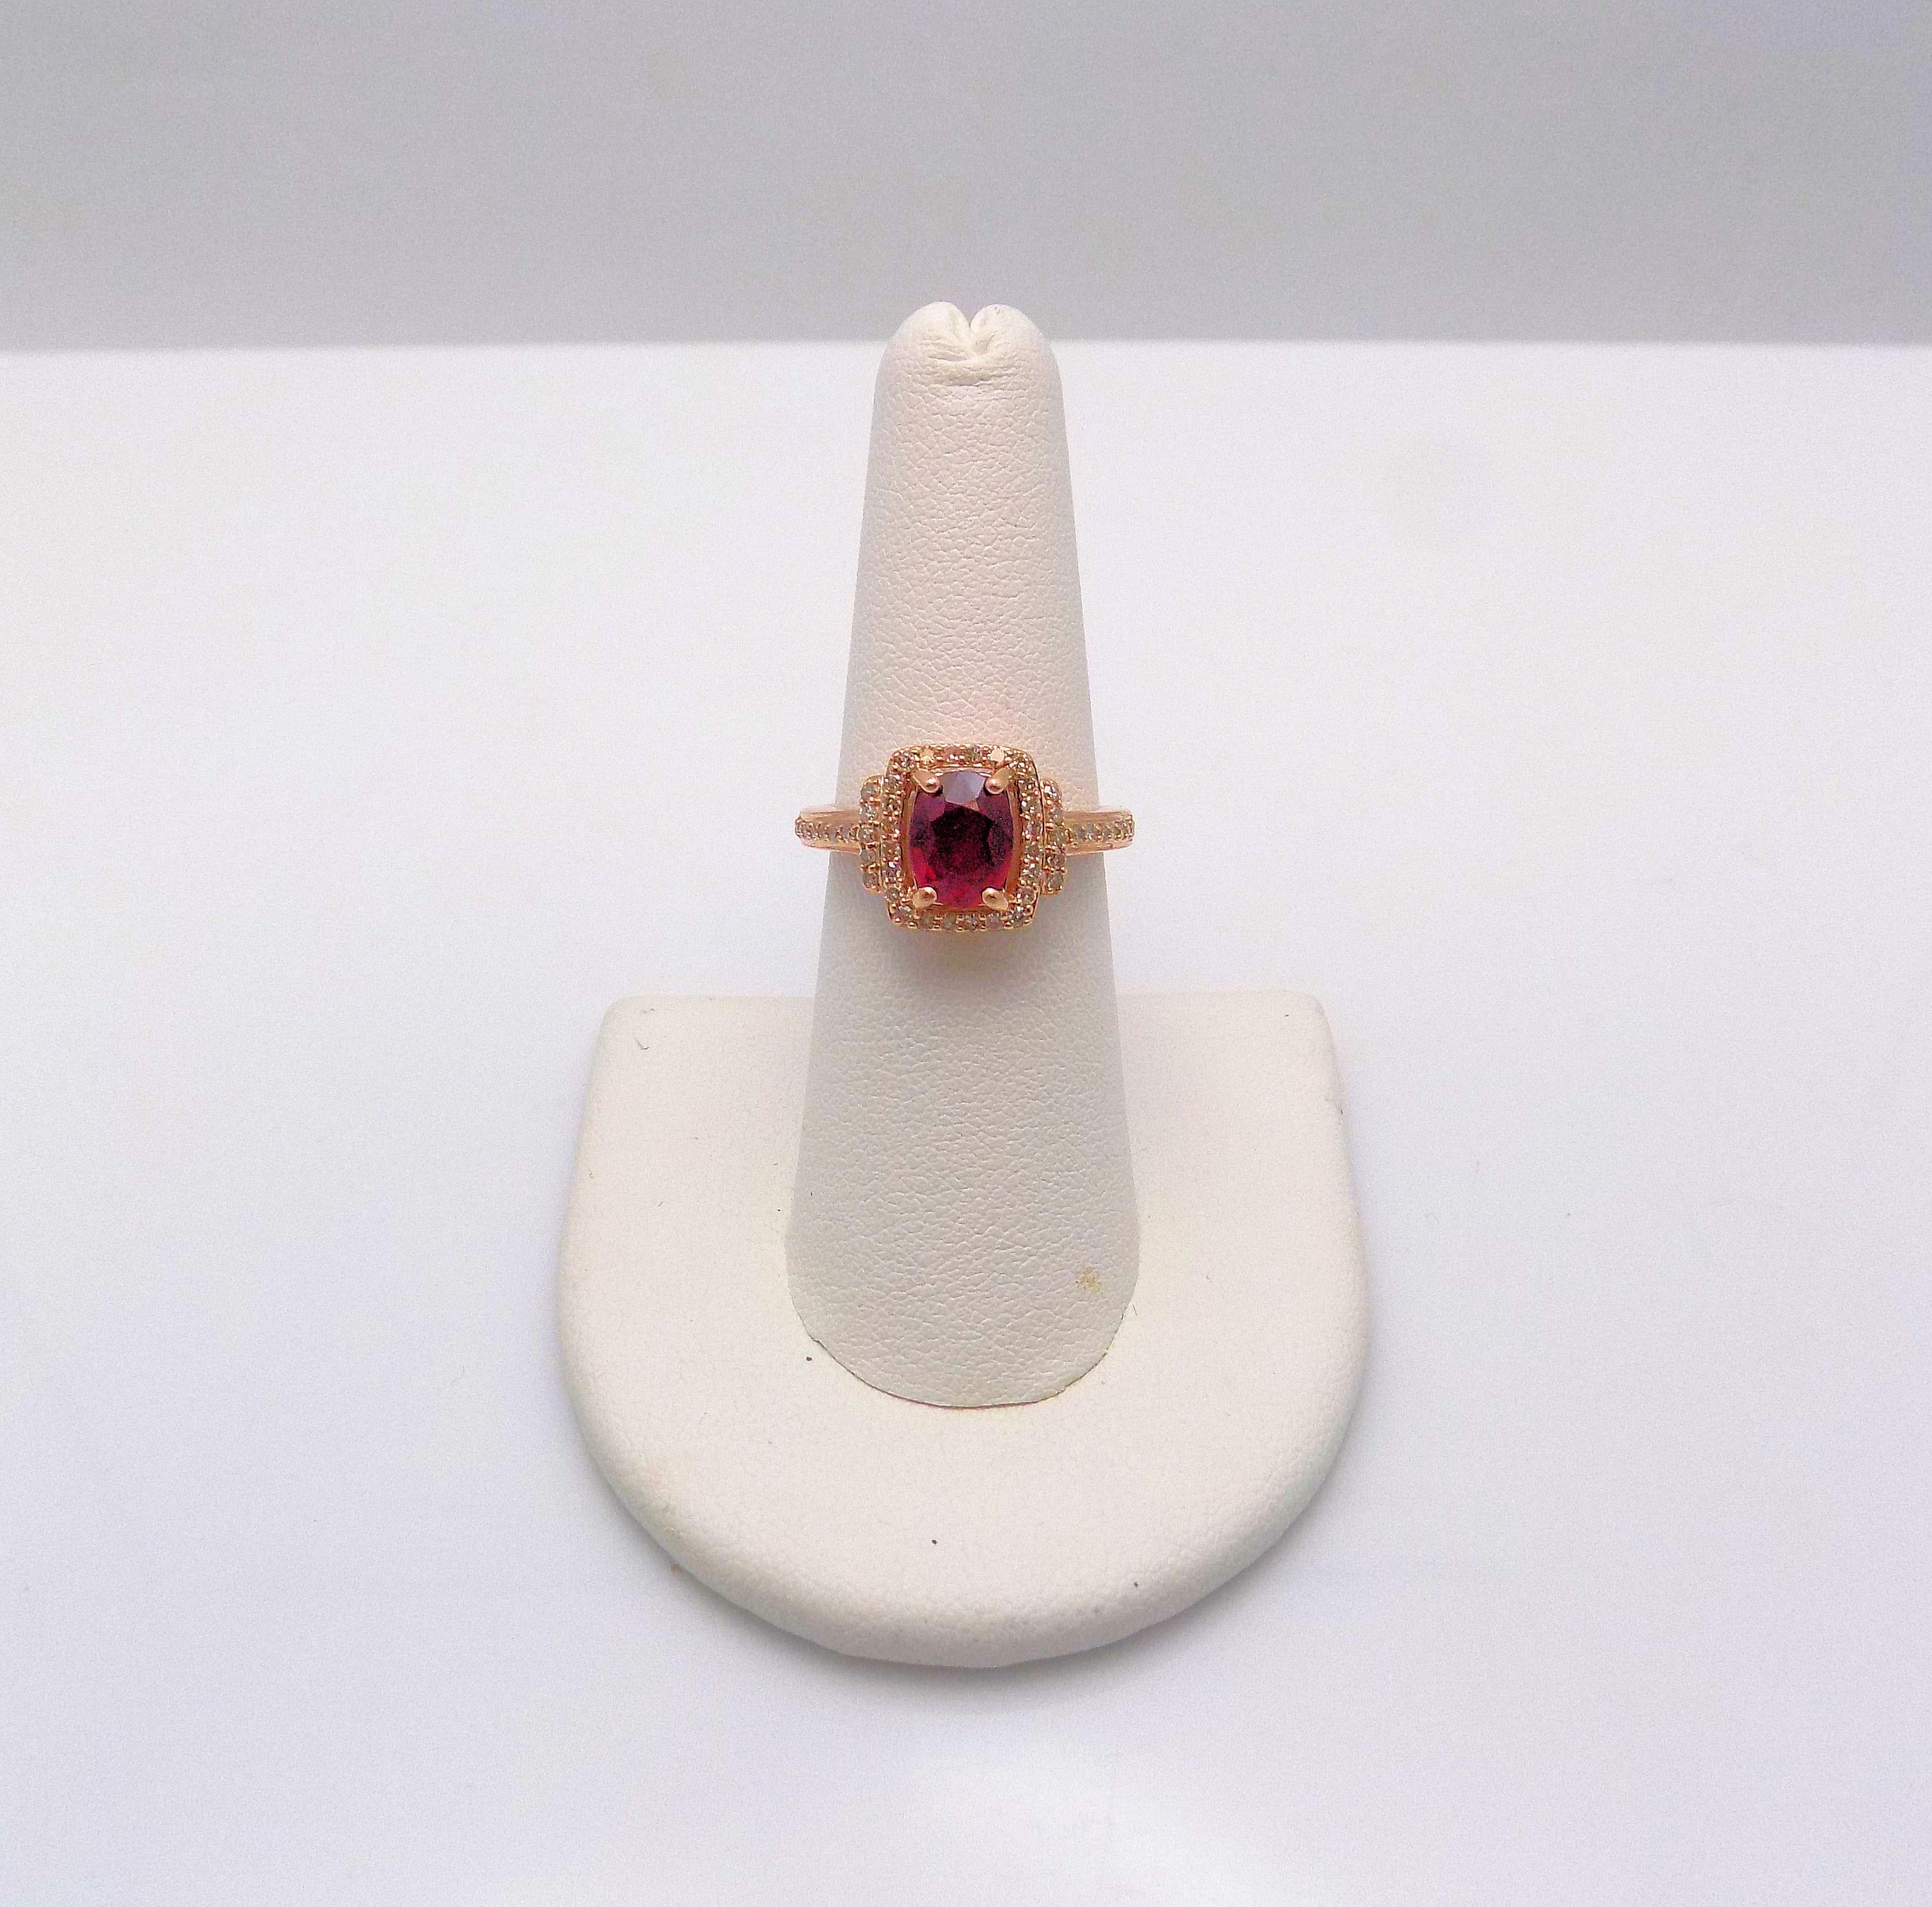 14 Karat Rose Gold Ring featuring 1 Oval Ruby 1.25 Carat; 48 Single Cut 0.25 Carat Total Weight, SI, H-I; Ring Size/Finger Size 7; 2.3 DWT or 3.58 Grams.